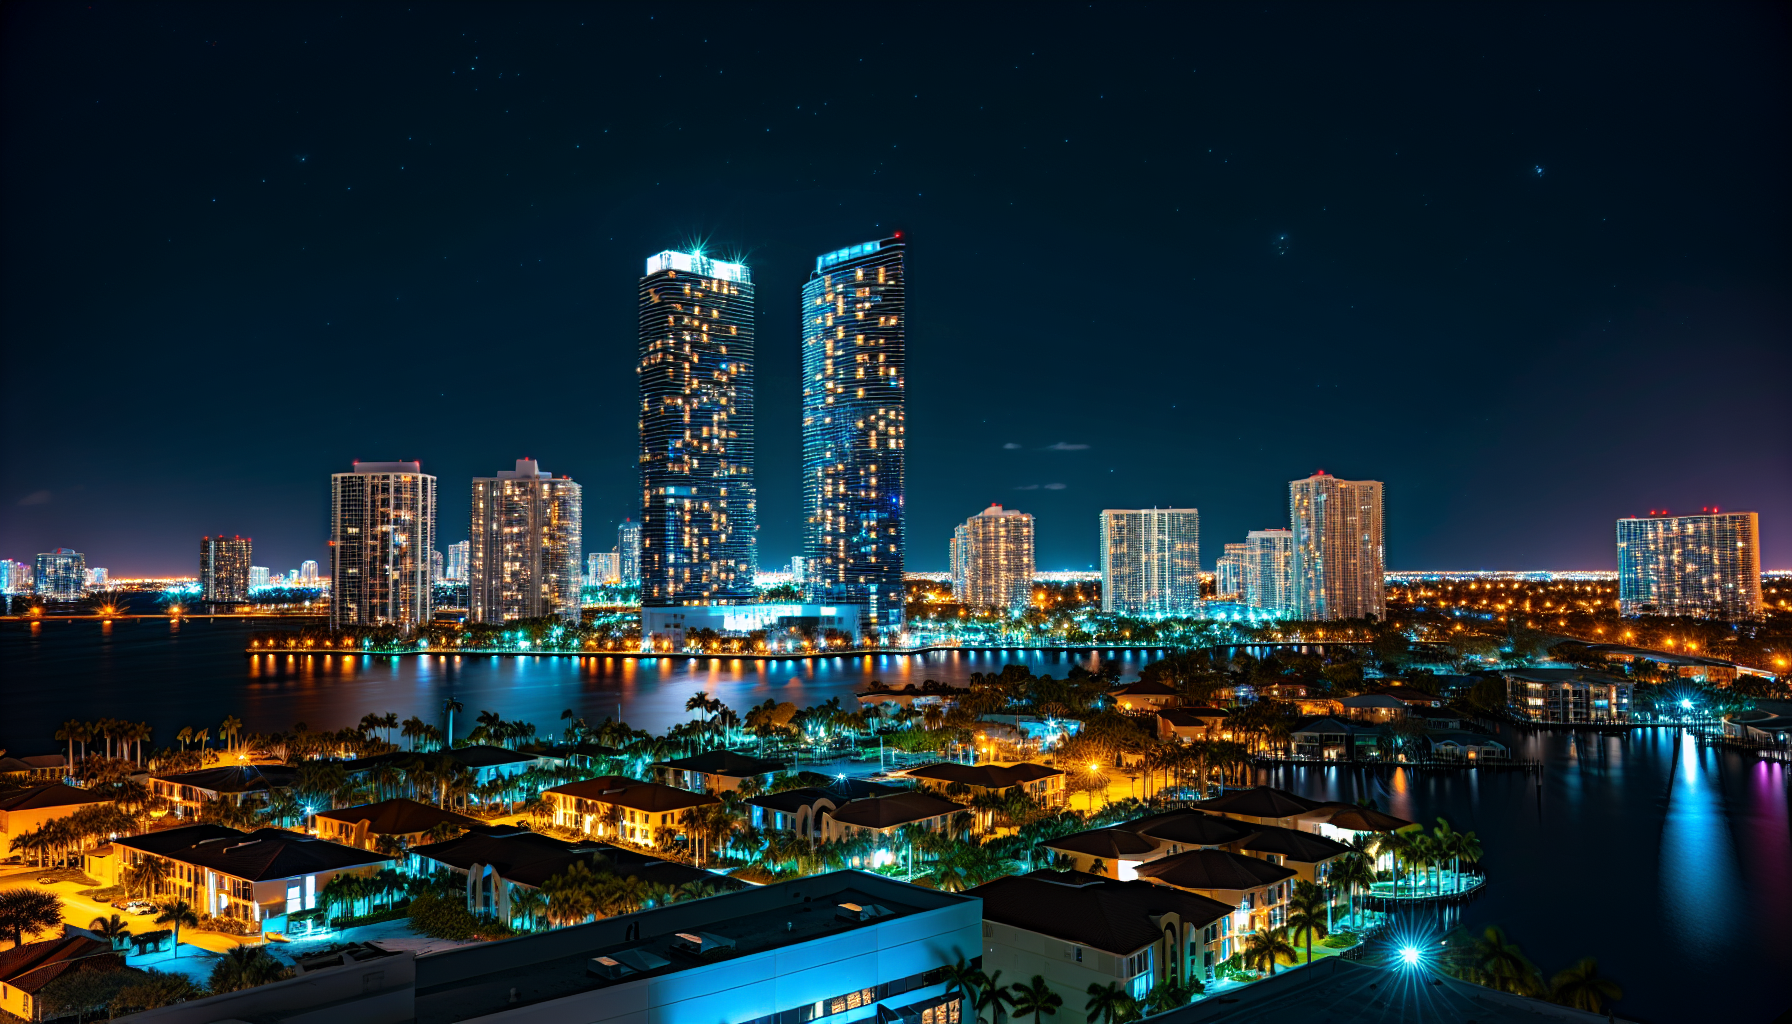 City skyline at night in Fort Lauderdale